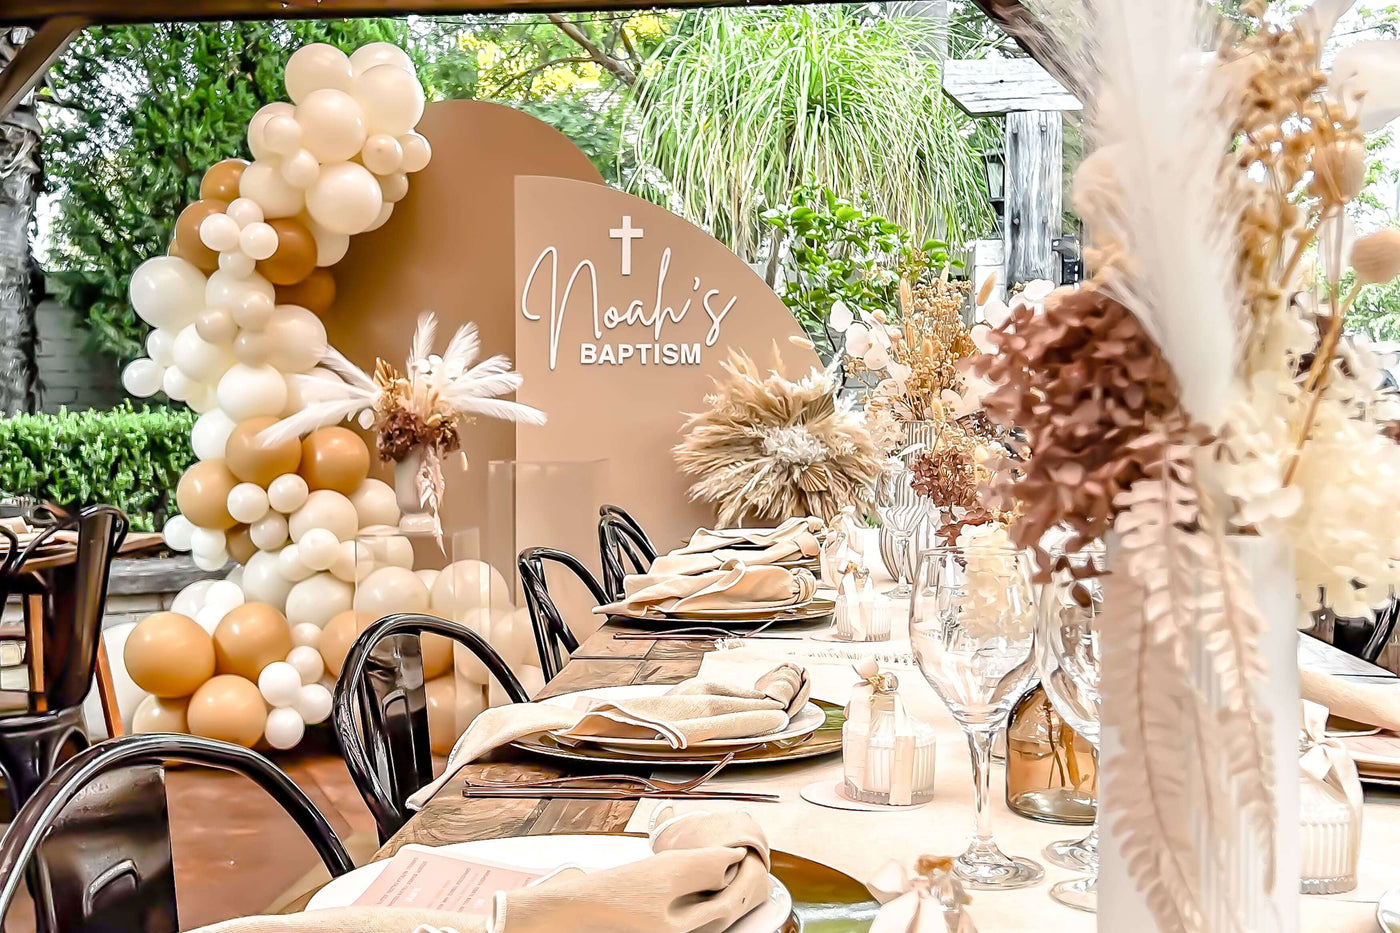 beige and brown arch backdrops with balloons and flowers behind boho table setting